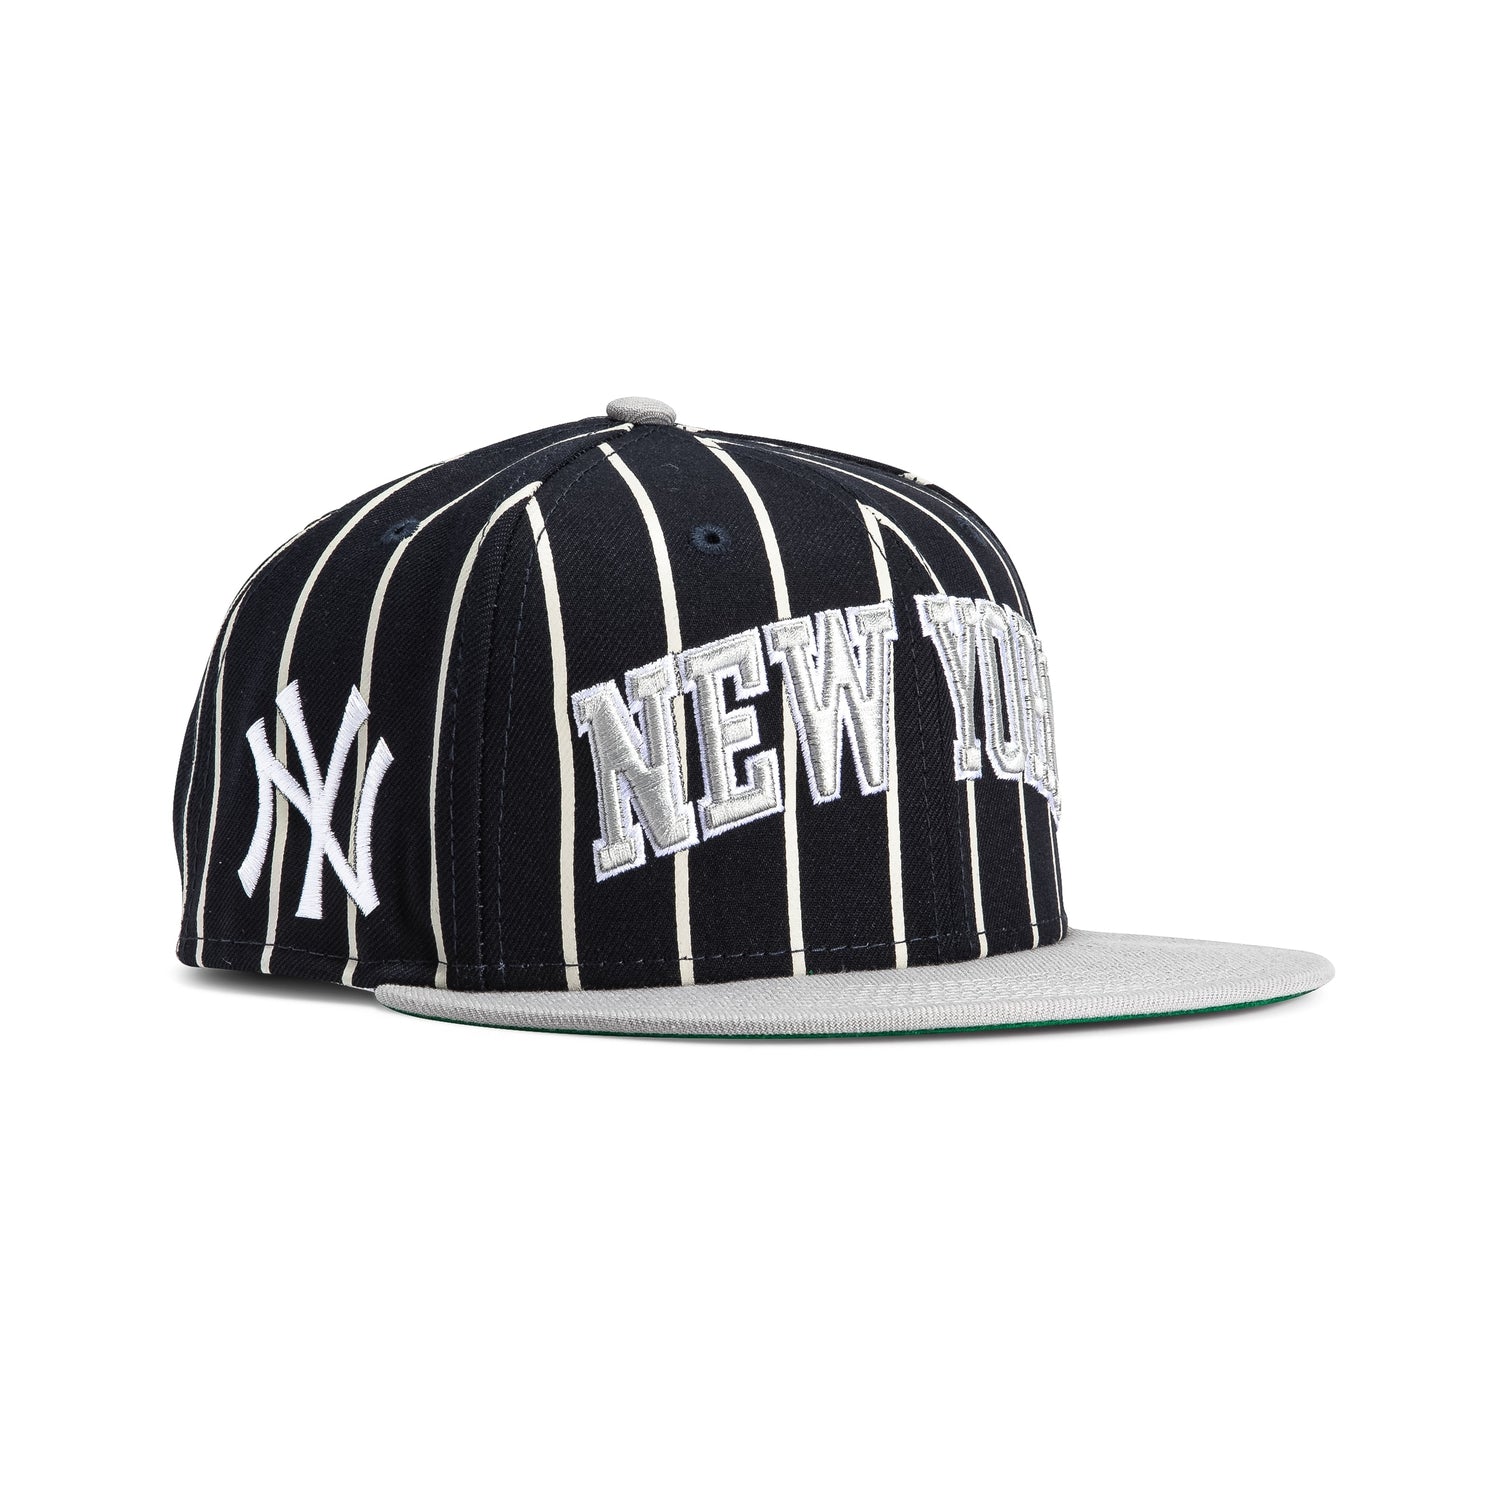 New York Yankees Clubhouse 950 Black/White